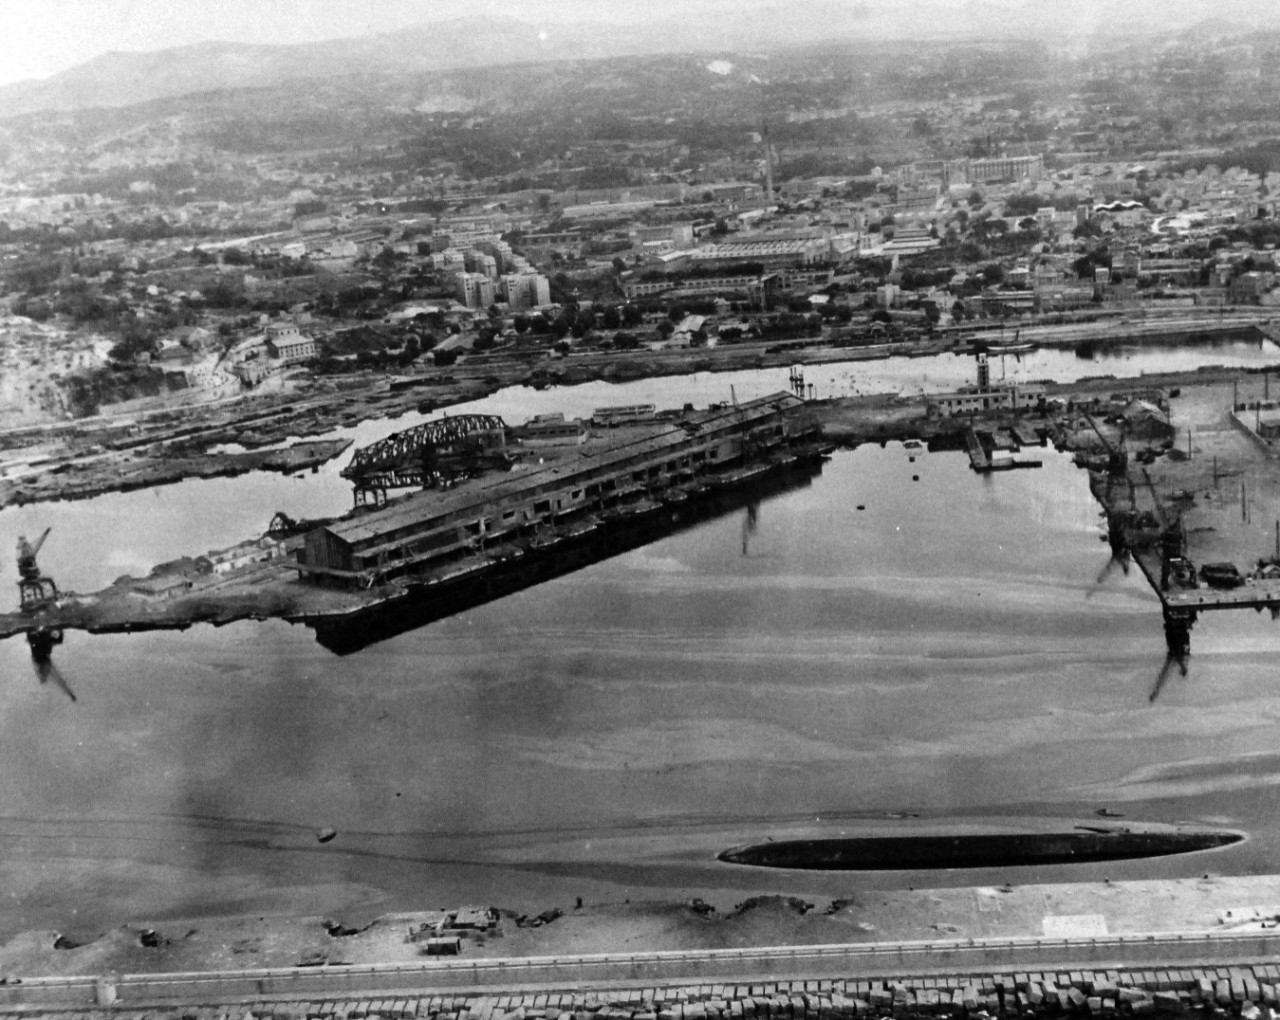 80-G-364014:  Invasion of Southern France, Toulon, August 1944.   Aerial view of the destruction to the harbor and installations at Toulon, France.  Taken by crew of USS Catoctin   (AGC 5).  Photograph received on 2 April 1946.   Official U.S. Navy Photograph, now in the collections of the National Archives.  (2014/7/10).